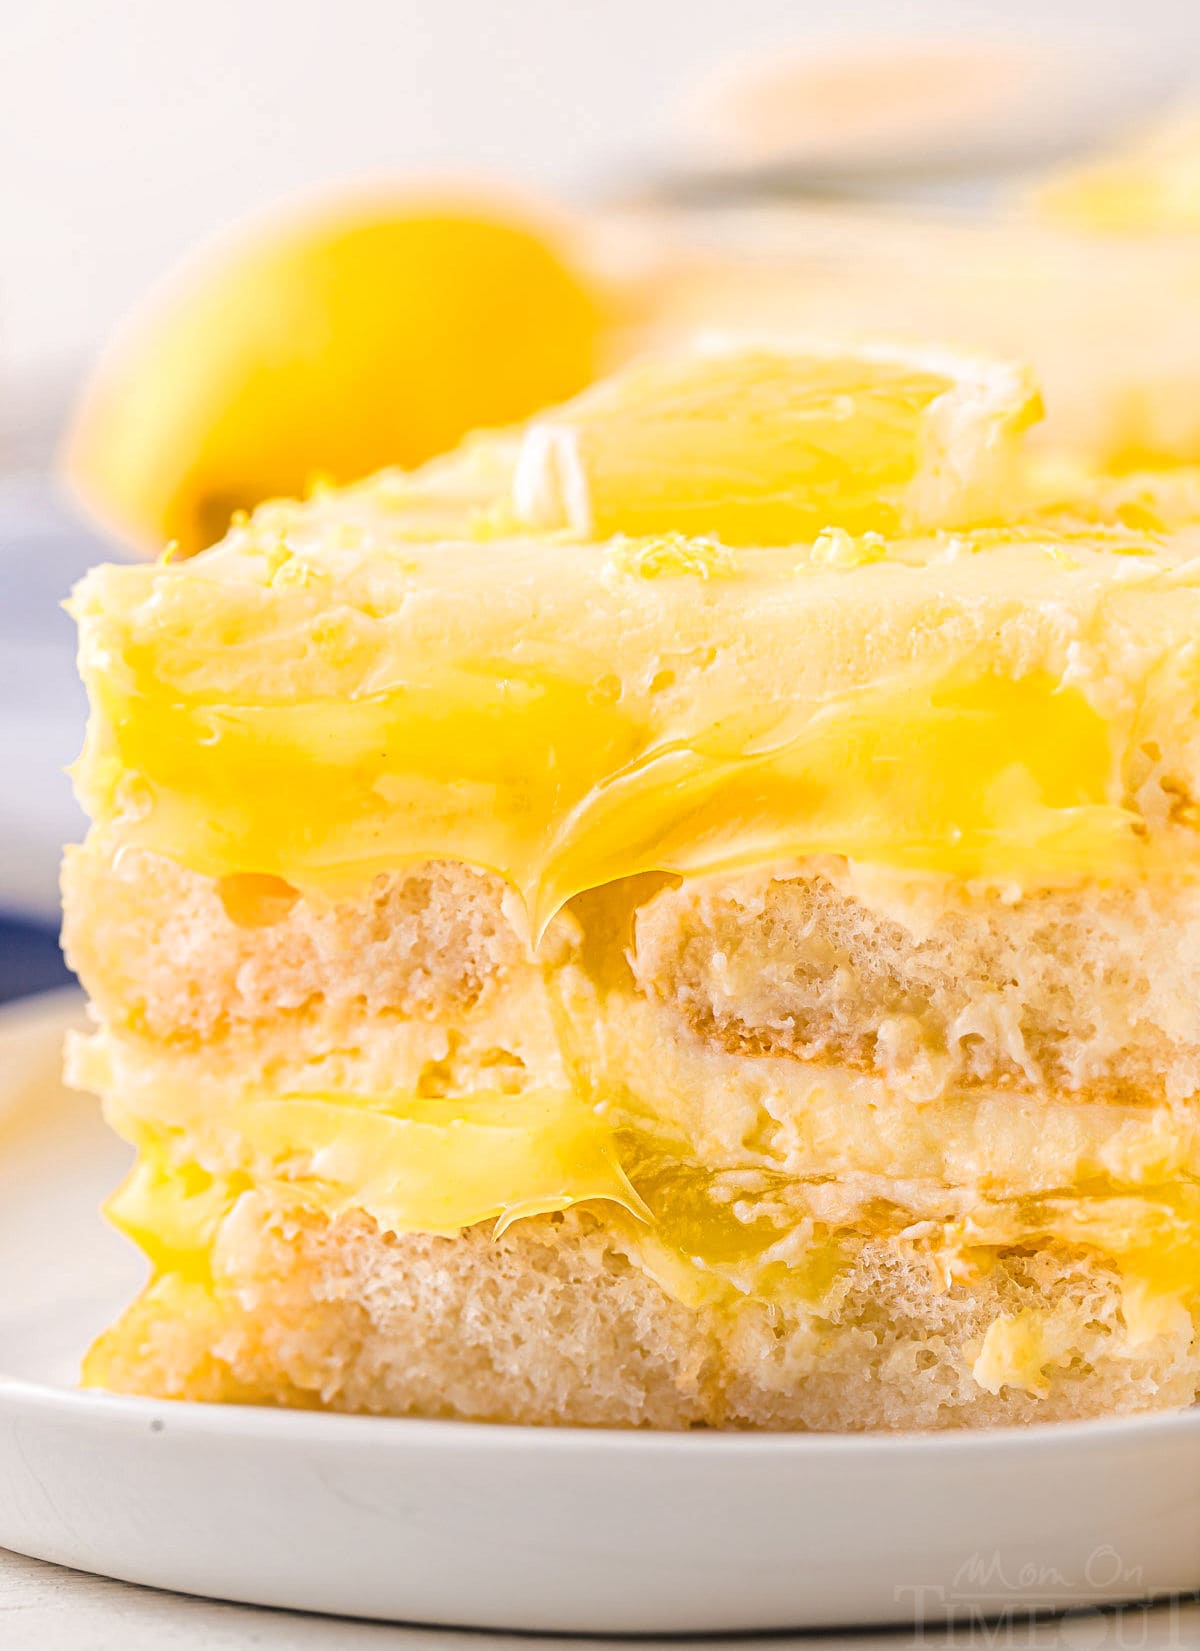 close up look at the wonderful layers in this lemon tiramisu recipe. the ladyfingers and lemon curd layers can be clearly seen. 